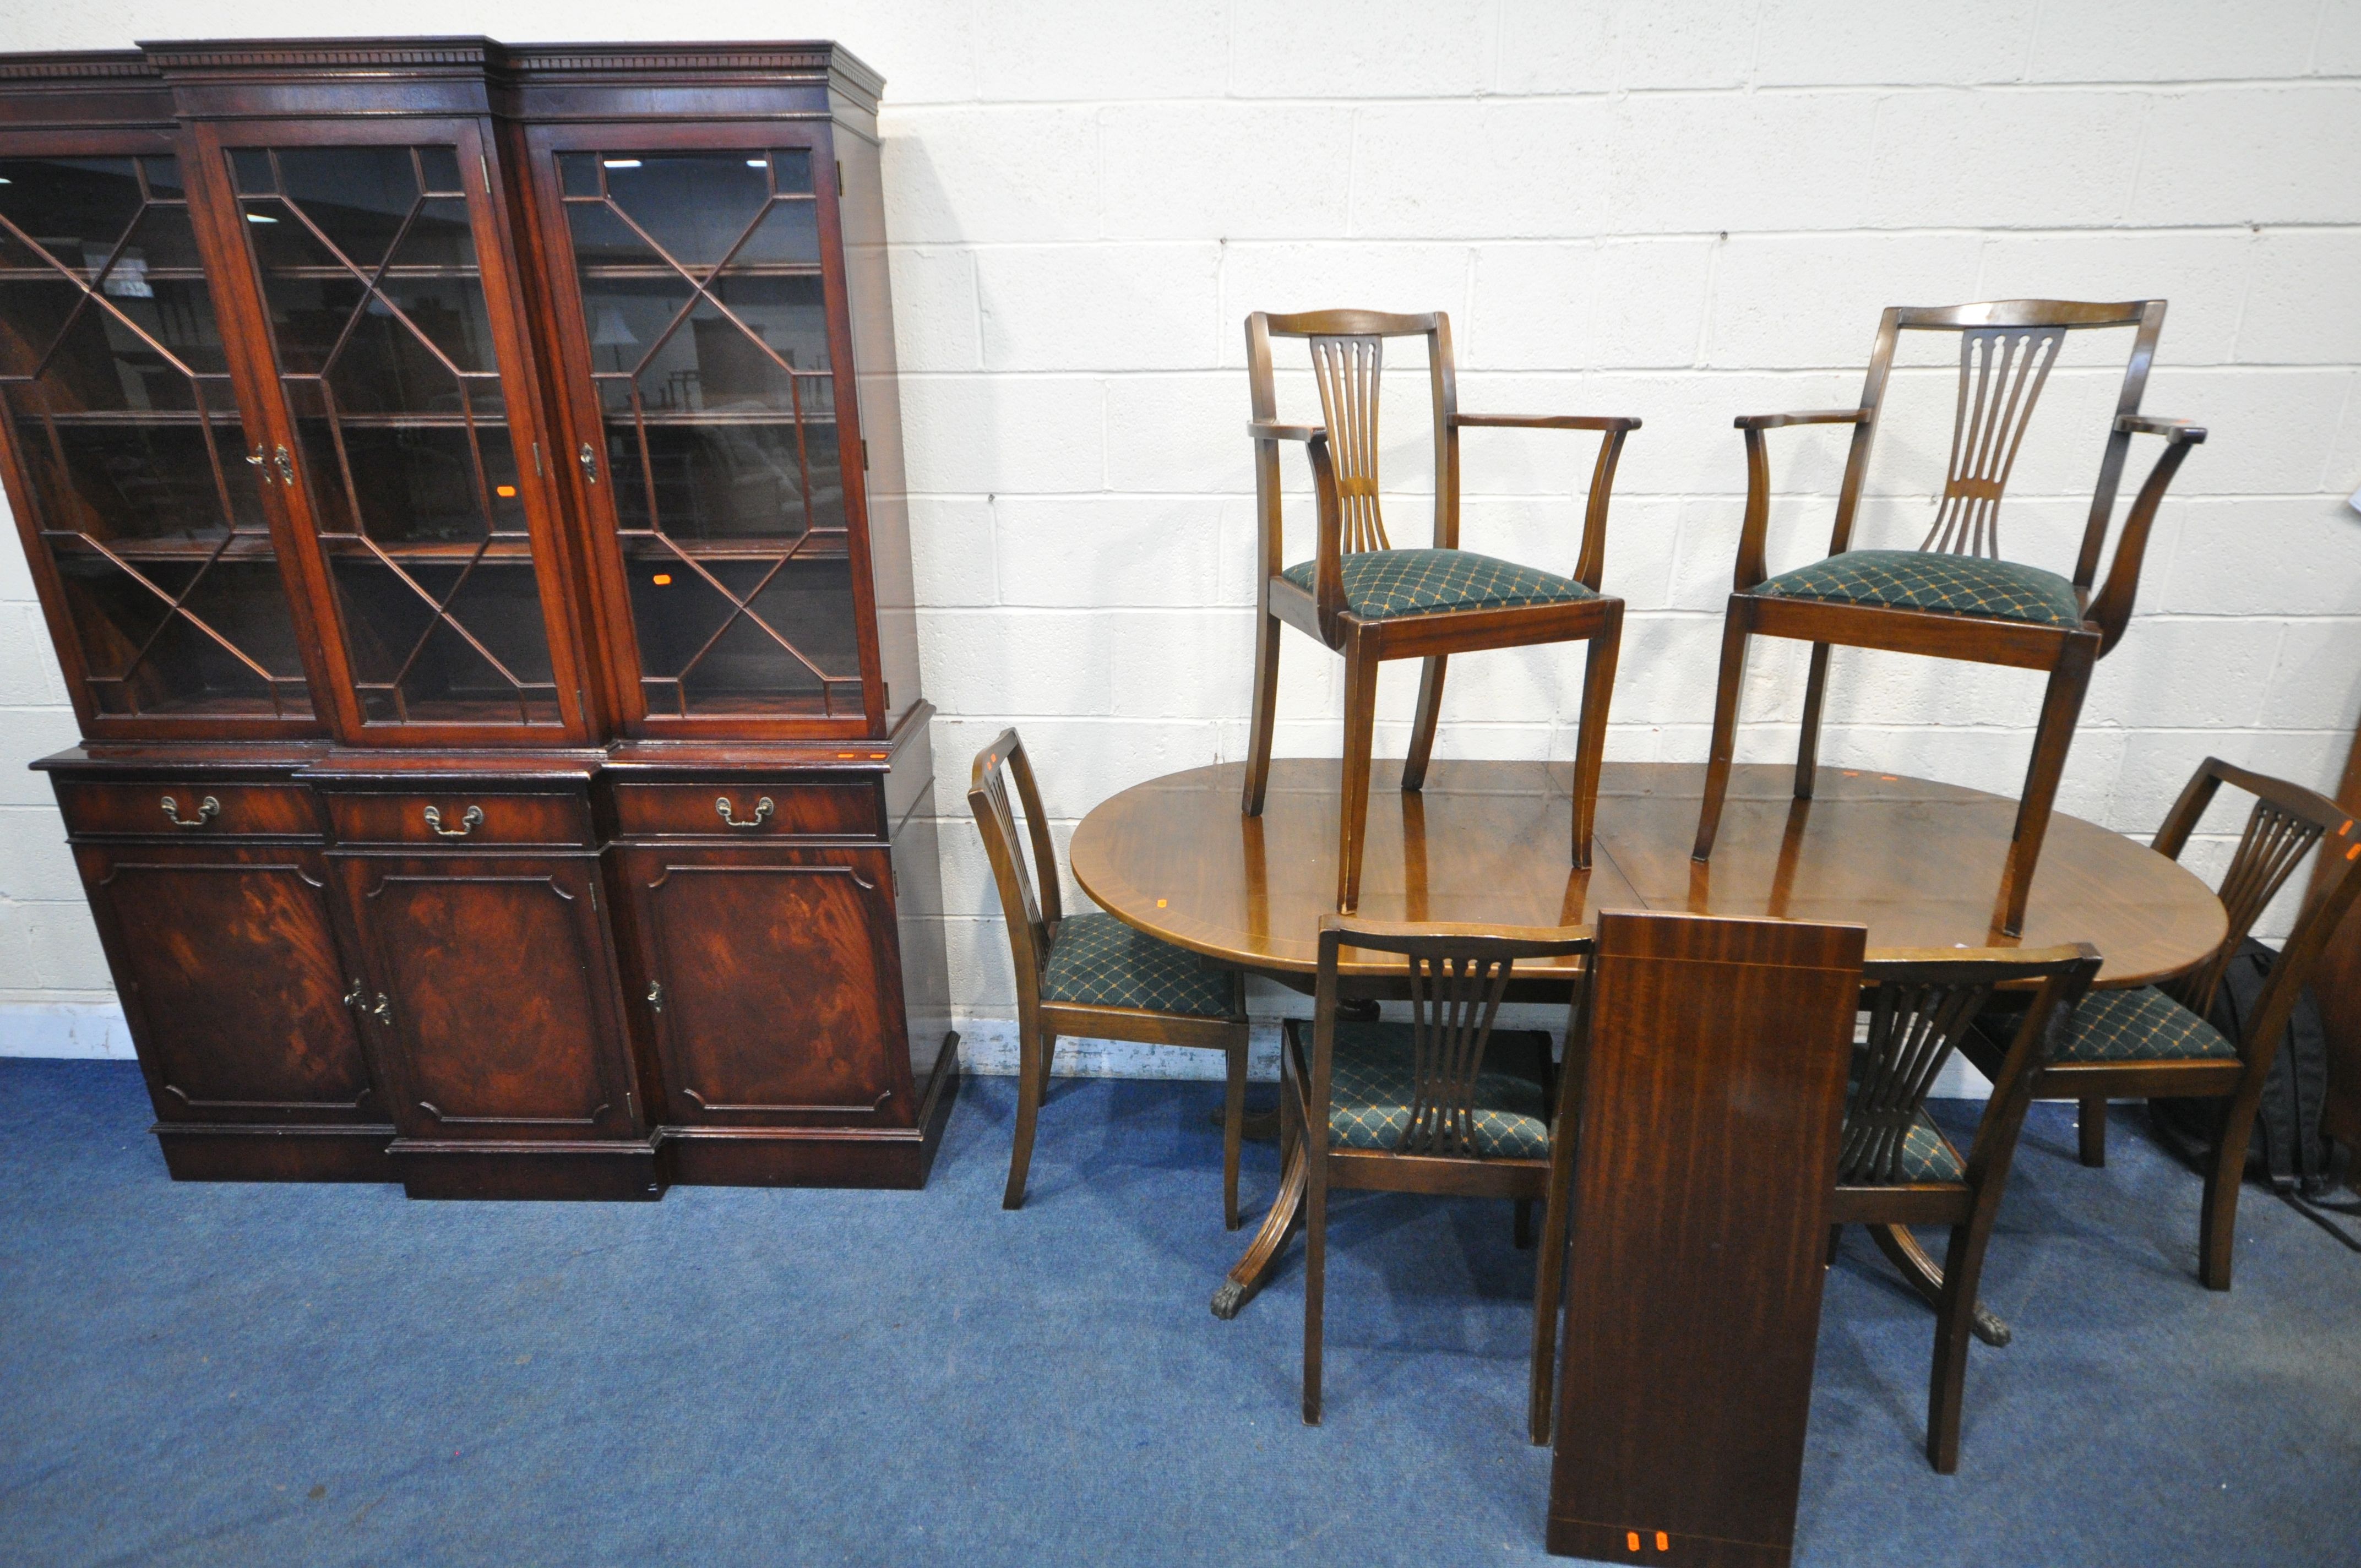 A 20TH CENTURY MAHOGANY OVAL EXTENDING DINING TABLE, with one additional leaf, open length 213cm x